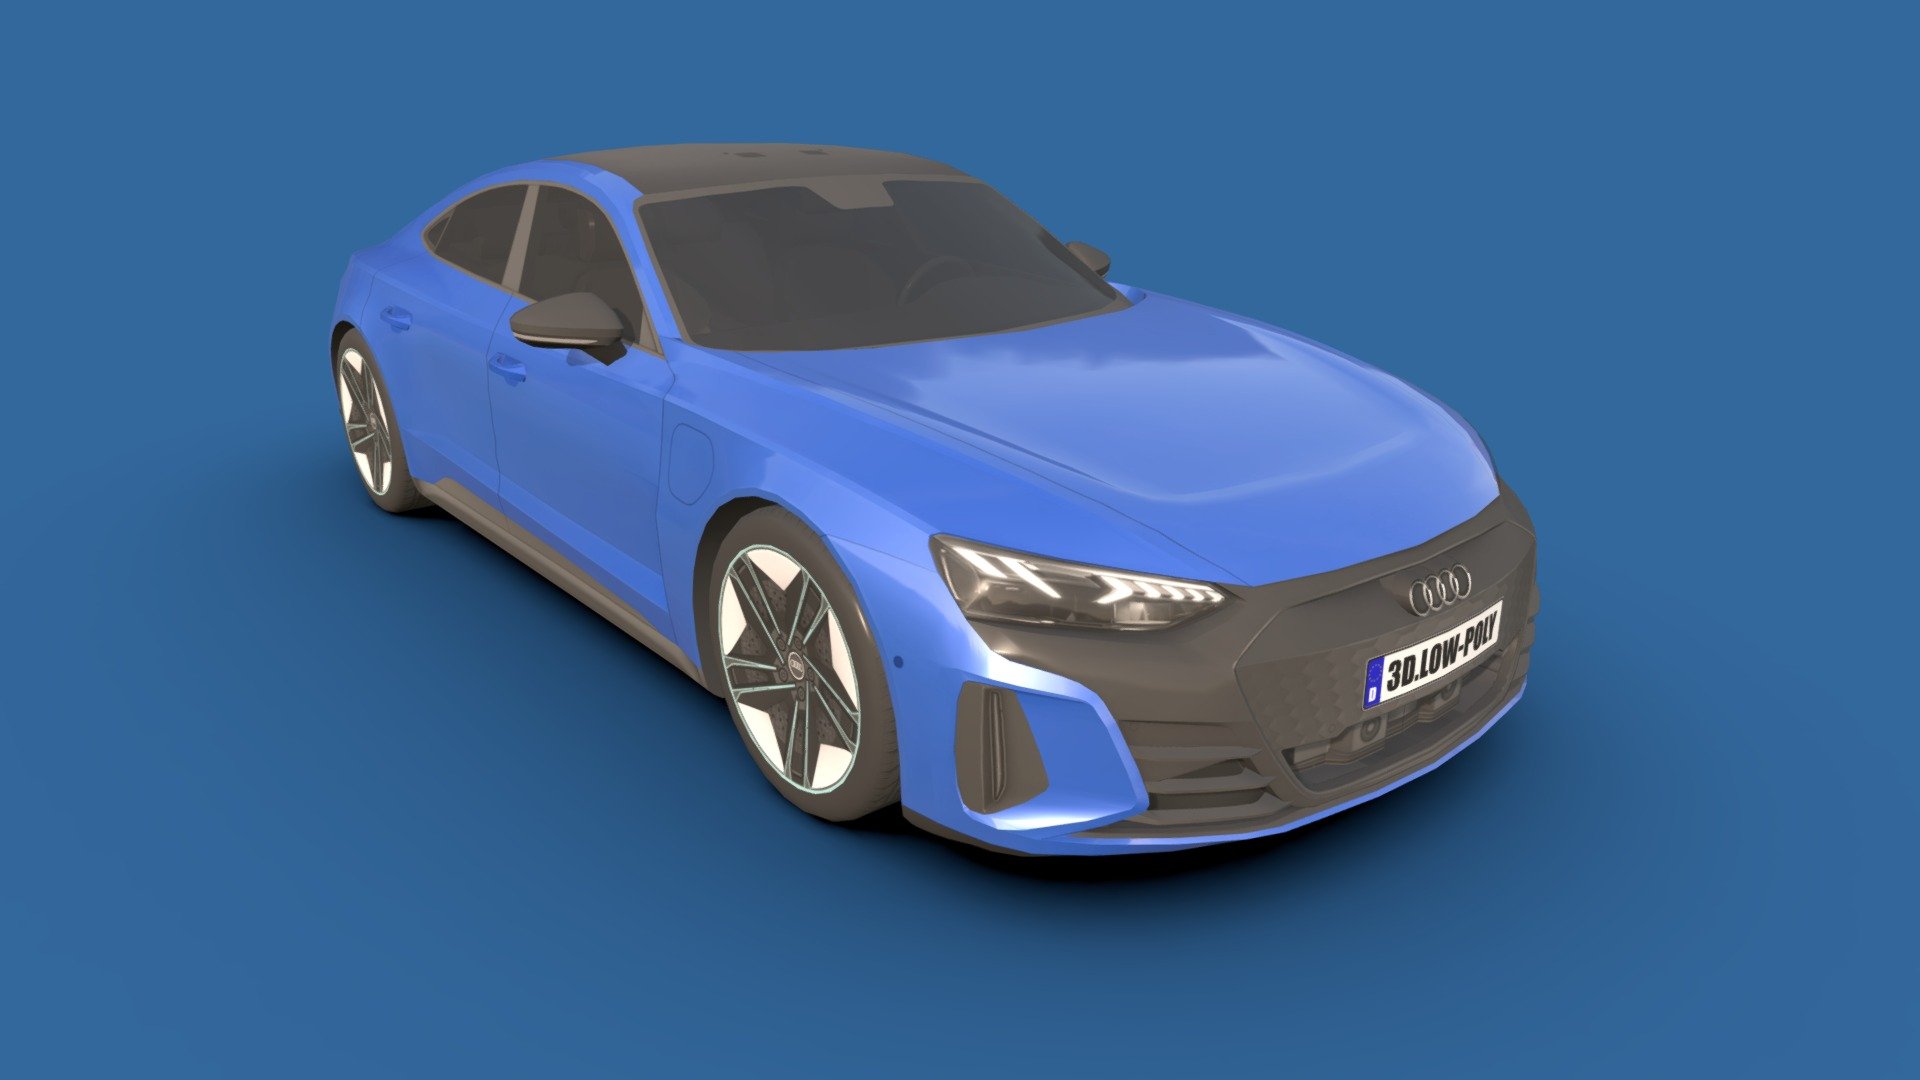 *2022 Audi e-tron GT

*You can use these models in any game and any project.

*The interior of these models is simply designed so that it is low poly and can be used for any game.

*This model is made with order and precision.

*Separated parts (body. Wheels).

*low poly

*Average poly count: 16,000 tris.

Texture size: 4096 * 4096(BMP)_2048 * 2048(bmp).

*High quality texture

*Thanks 3d model